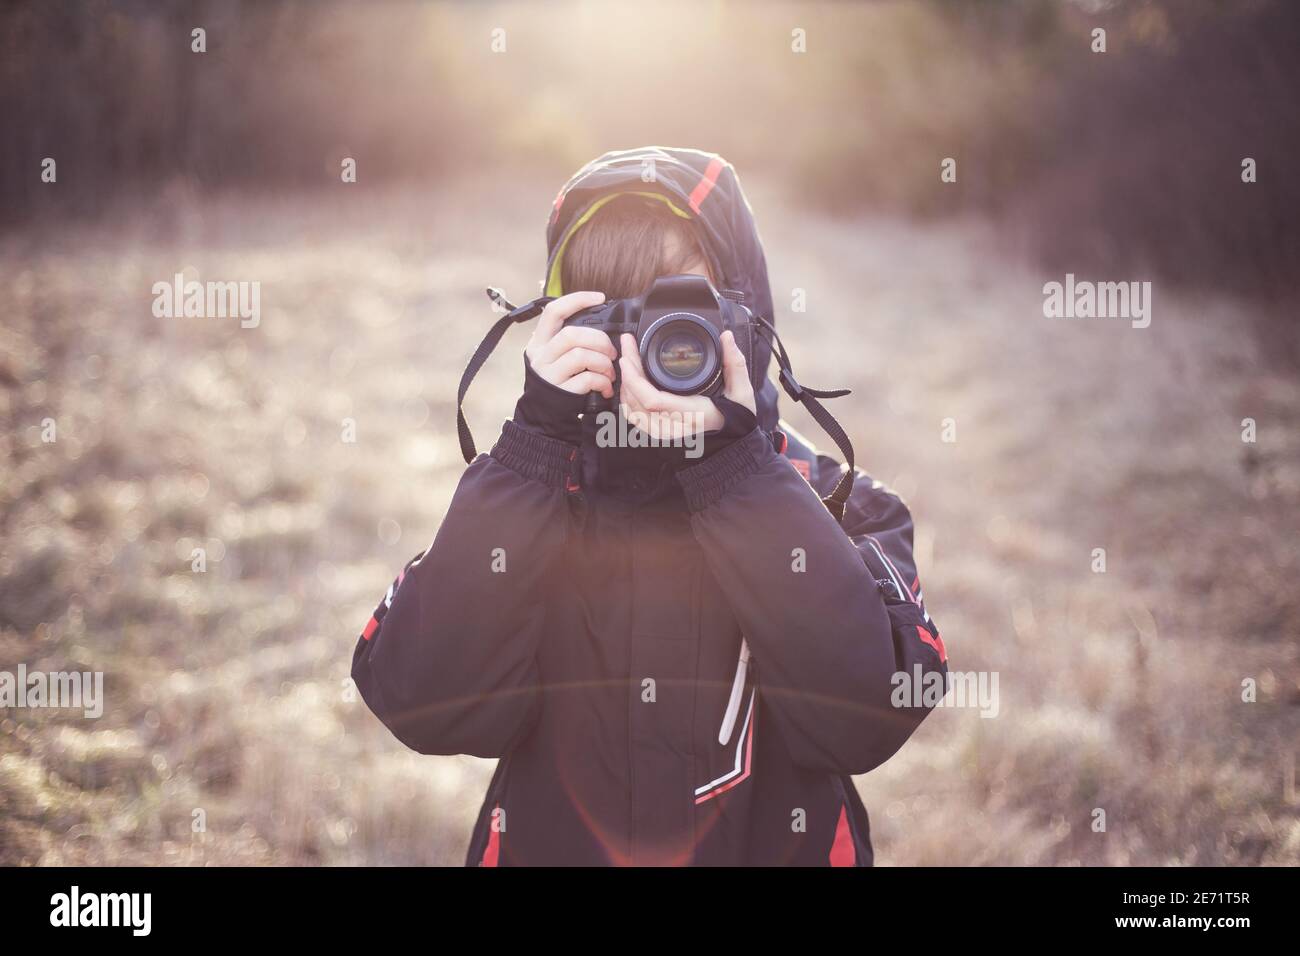 Boy child photographer learning photography, taking a photo, holding a professional dslr camera in front of his face. Stock Photo